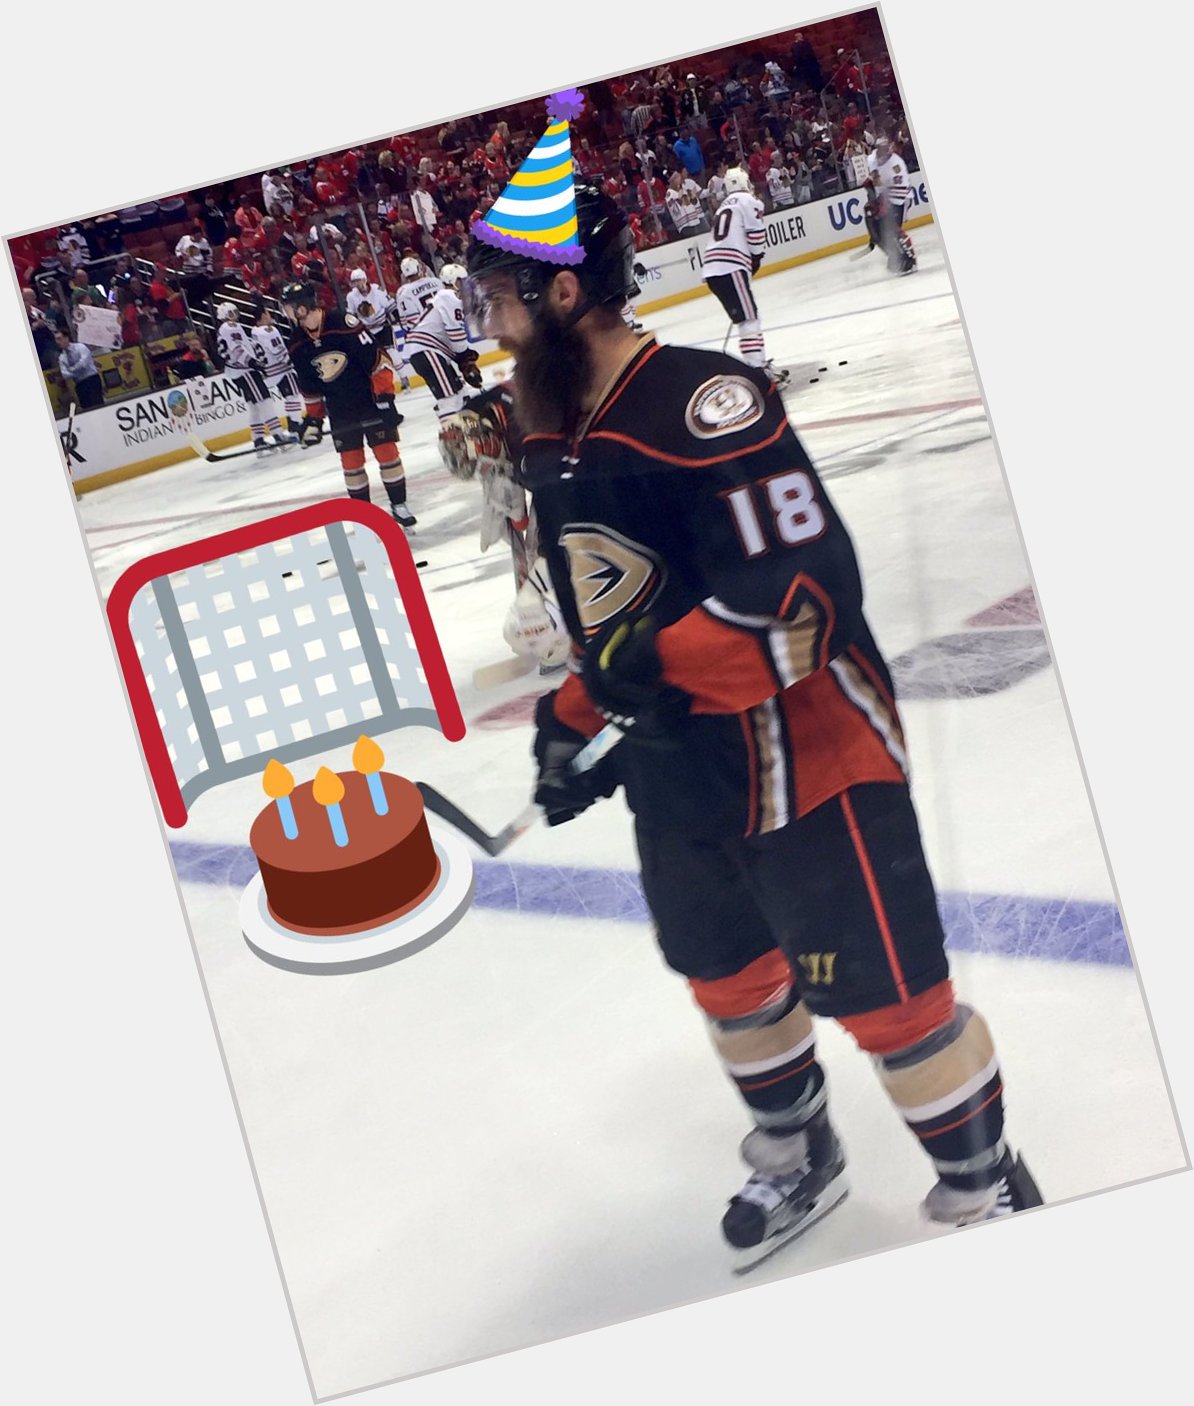  happy birthday! Hope your feeling better and we see ya back on the ice soon.  